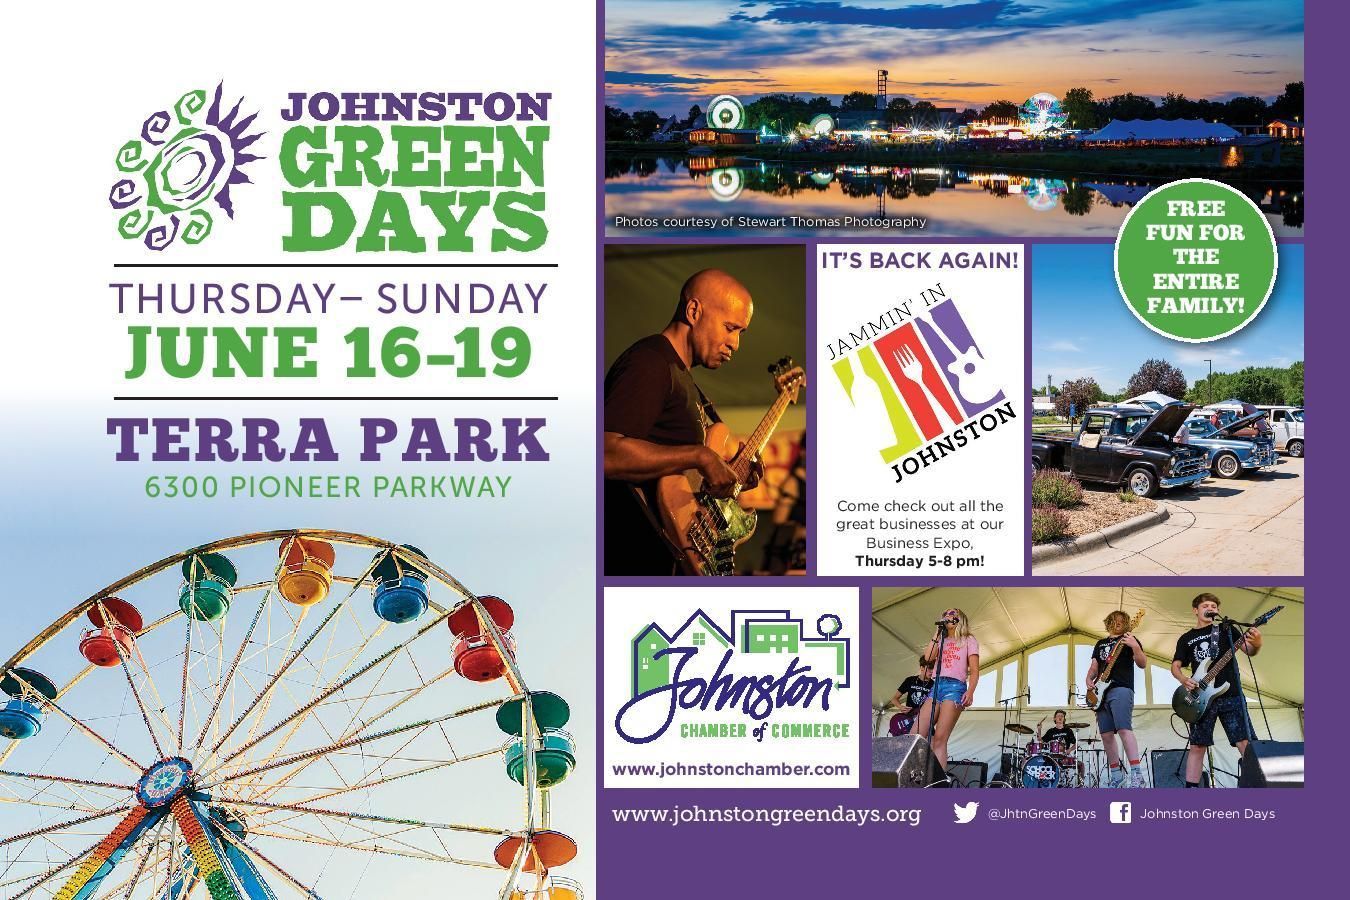 Image displaying information about Johnston Green Days. Thursday- Sunday June 16-19 at Terra Park in Johnston! 